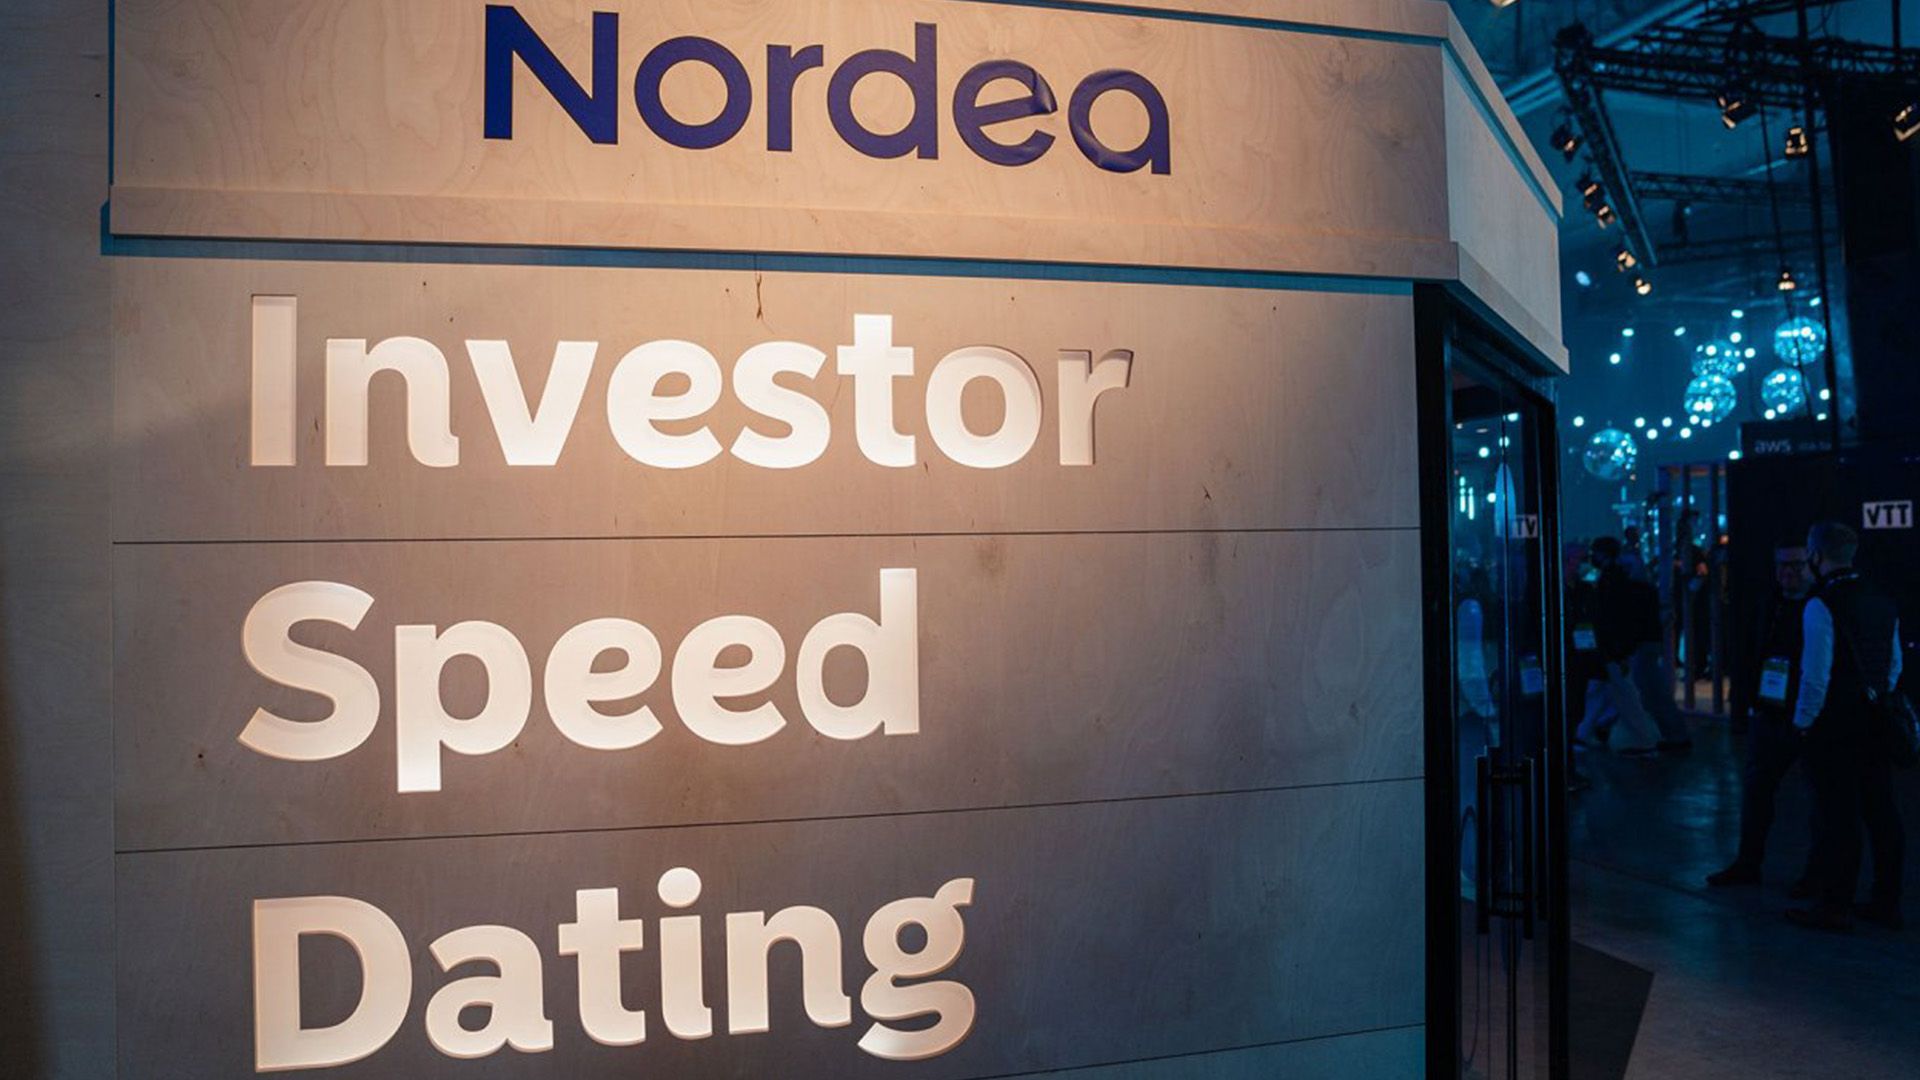 Cover Image for Broadcast is picked out for Nordea`s Investor Speed Dating!